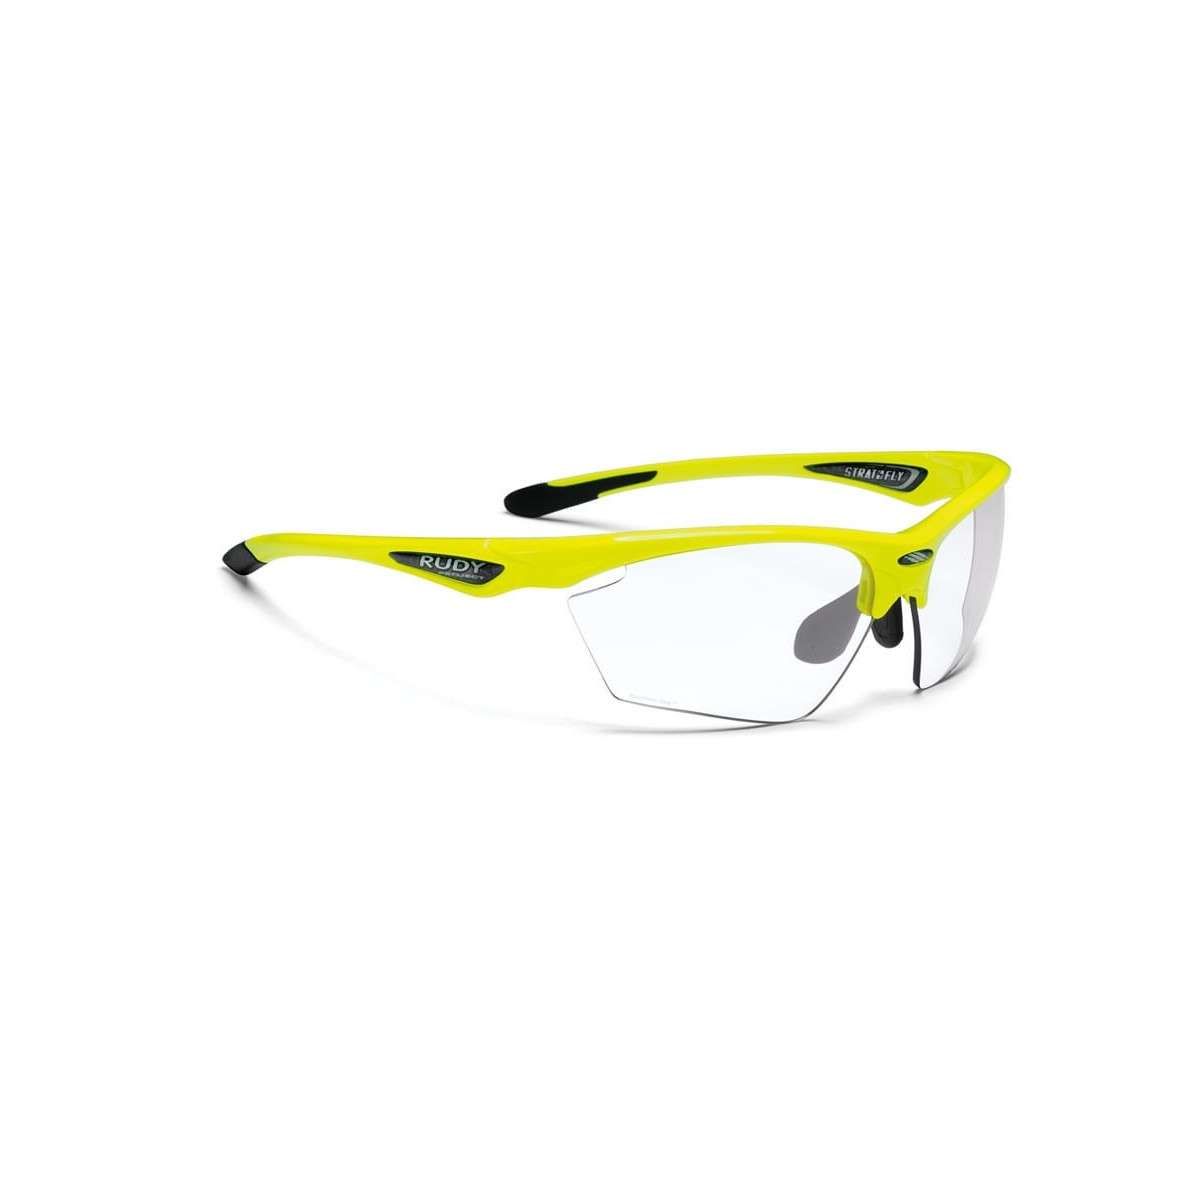 Pro ject günstig Kaufen-Stratofly Yellow Fluo RPO Photoclear Rudy Project Brille. Stratofly Yellow Fluo RPO Photoclear Rudy Project Brille . 